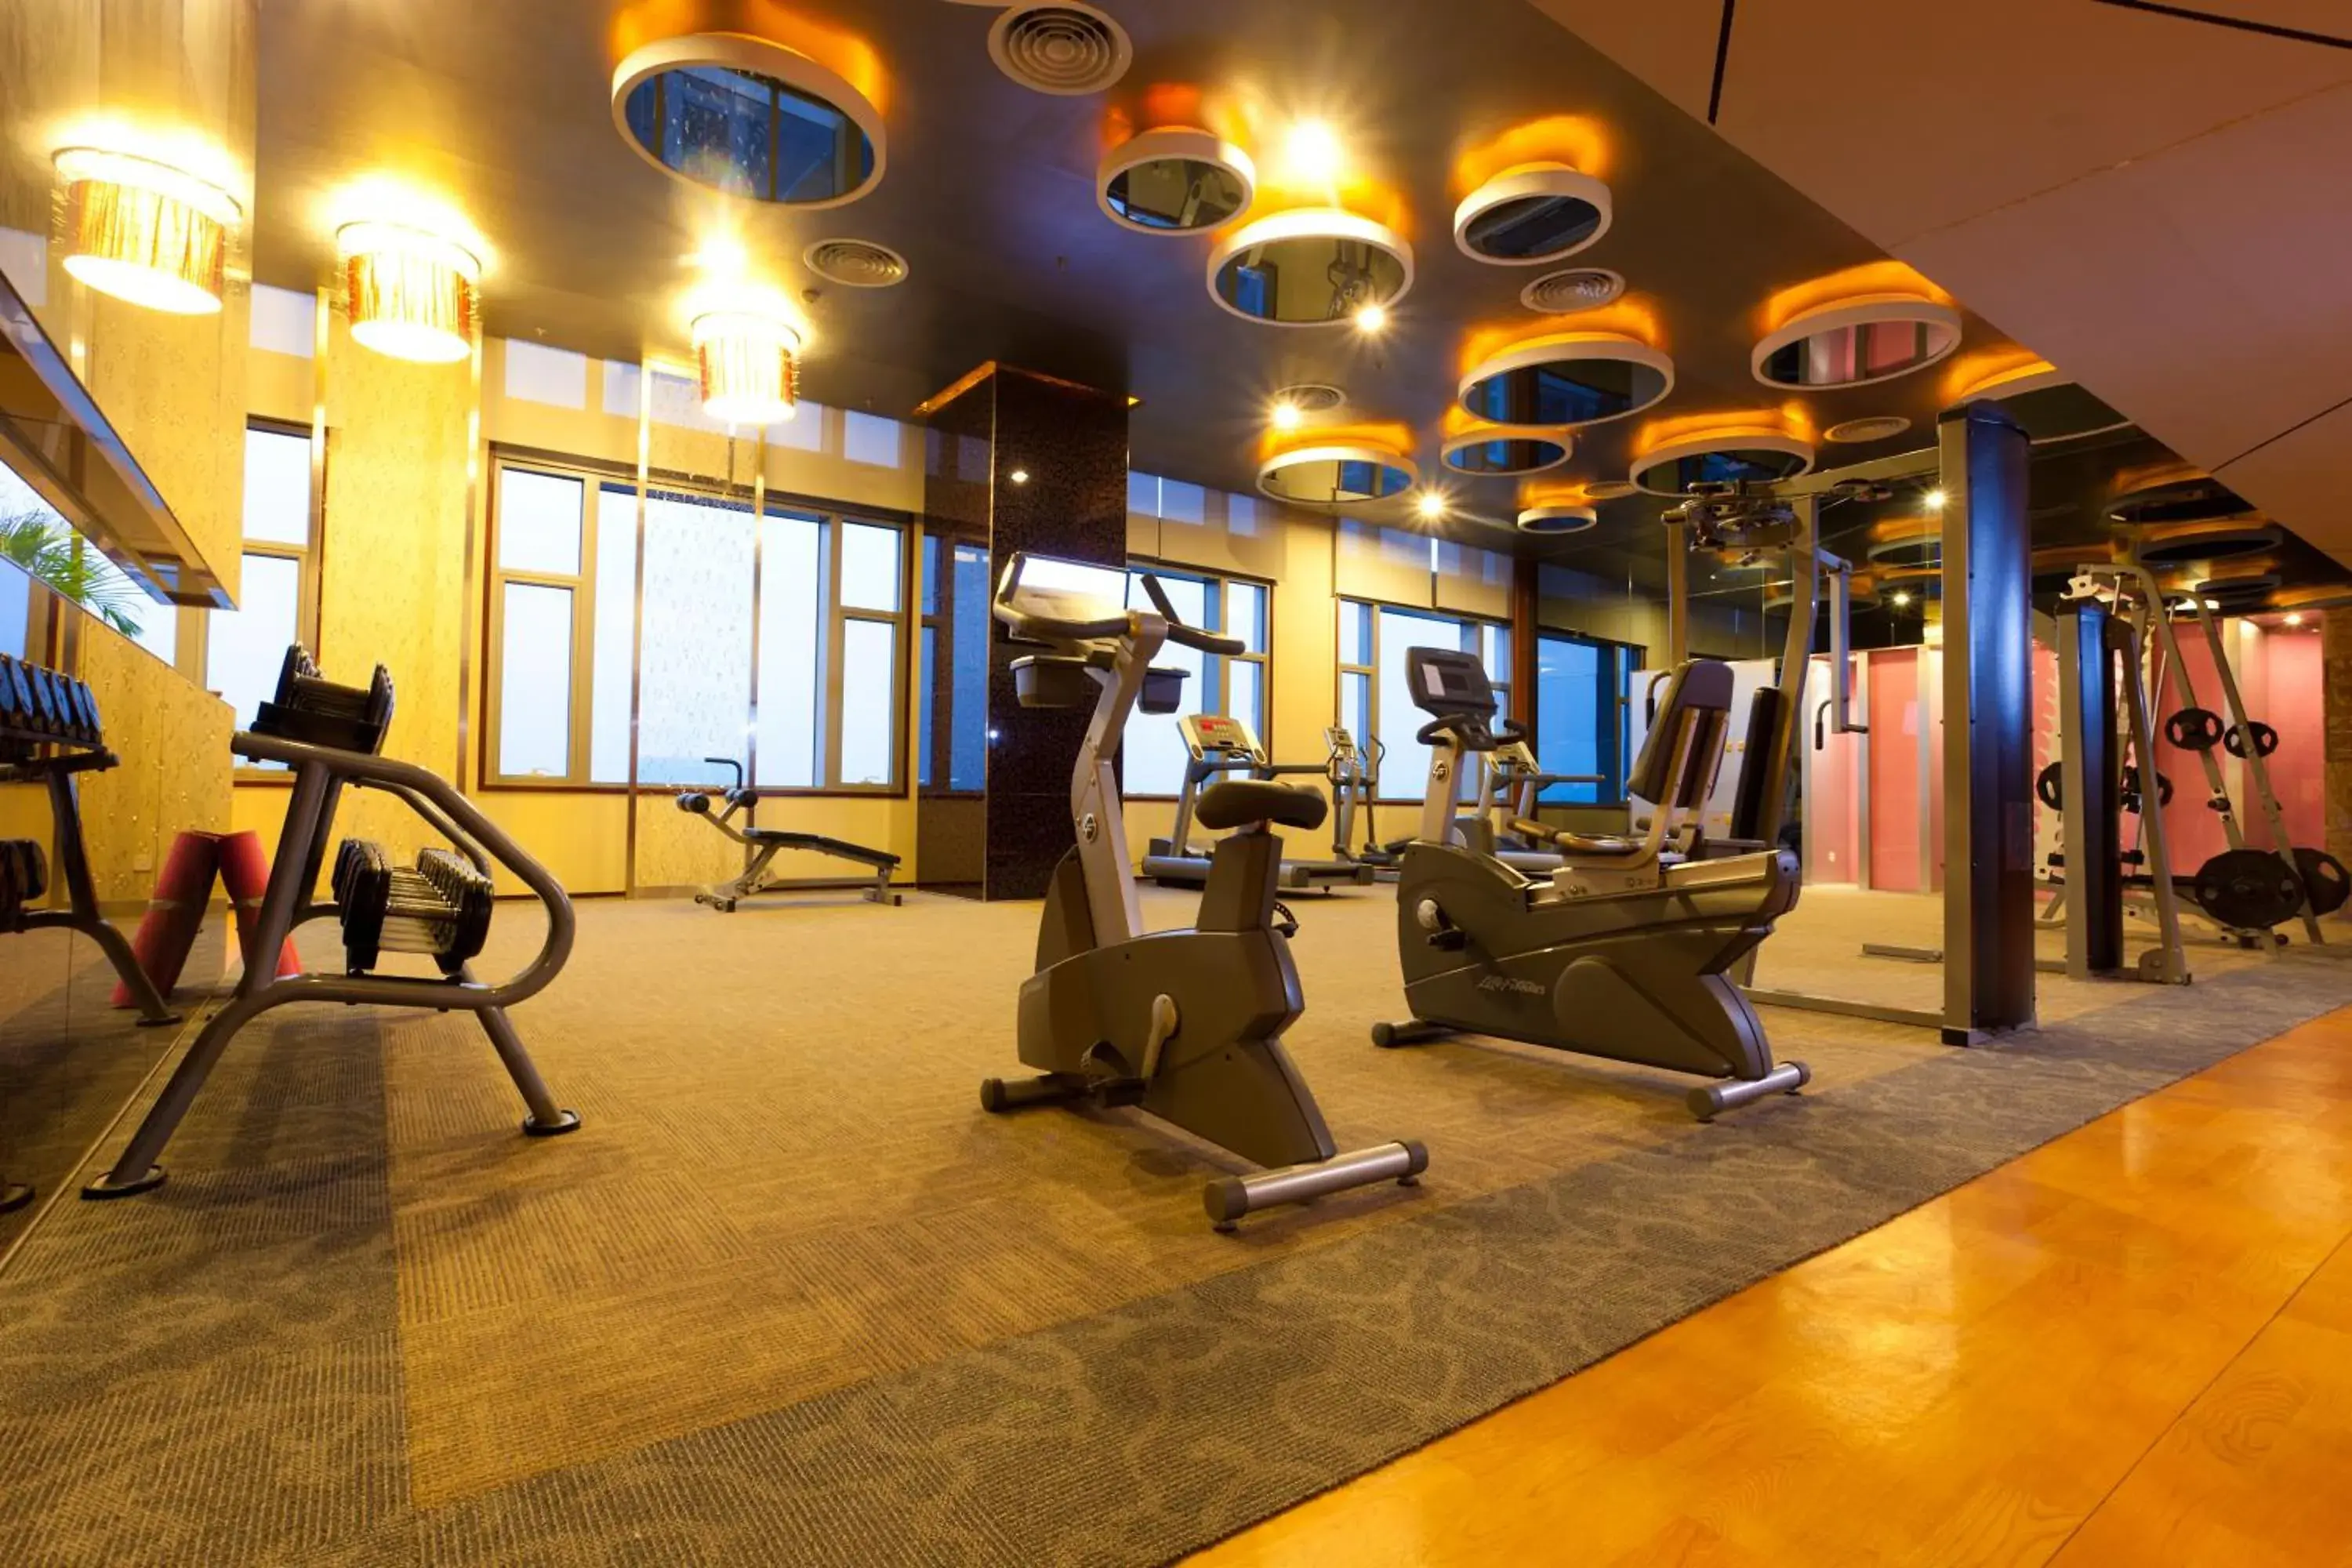 Fitness centre/facilities, Fitness Center/Facilities in Vision Hotel